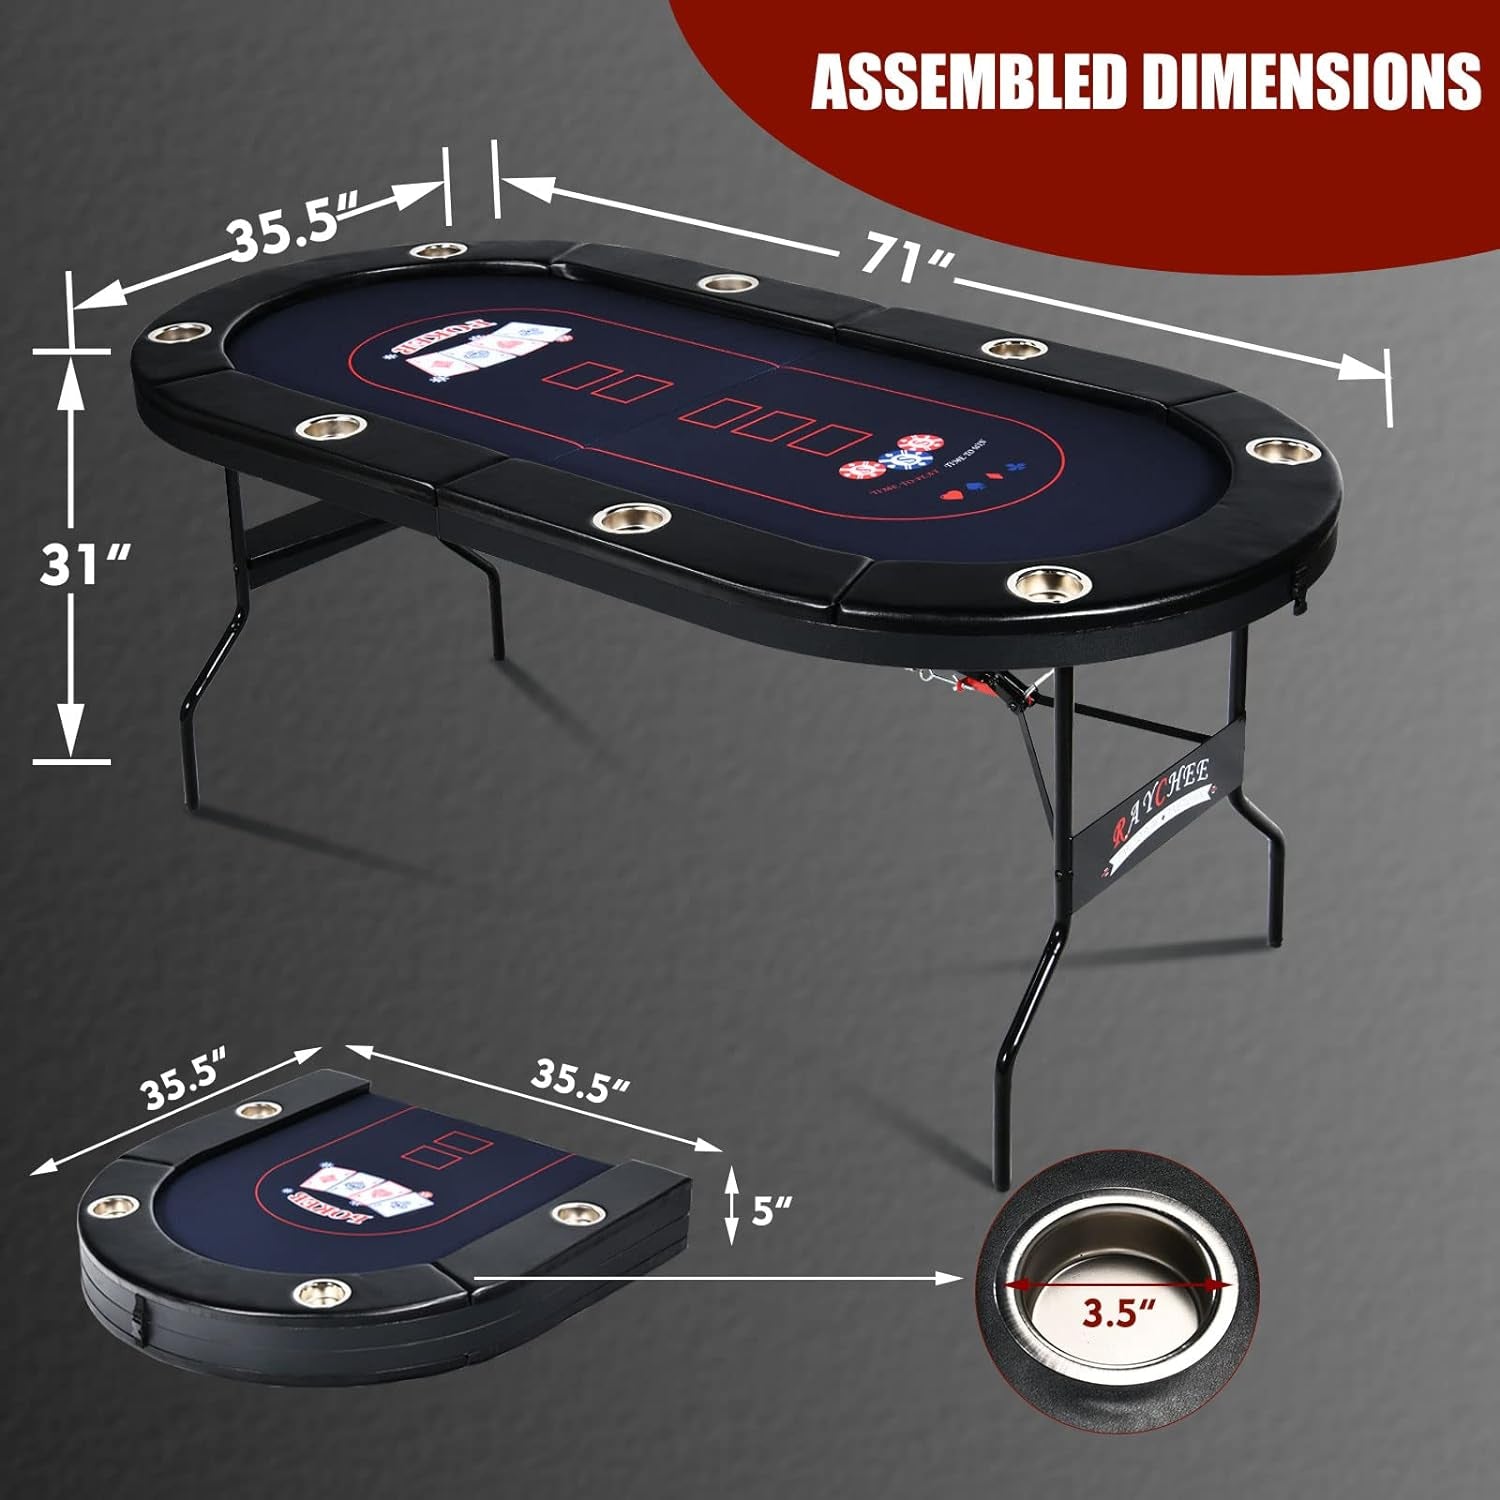 8 Player Foldable Poker Table, Texas Holdem Table, Folding Leisure Game Table, Portable Casino Table for Game Room with Padded Rails and Cup Holders (Black, 71 Inch)